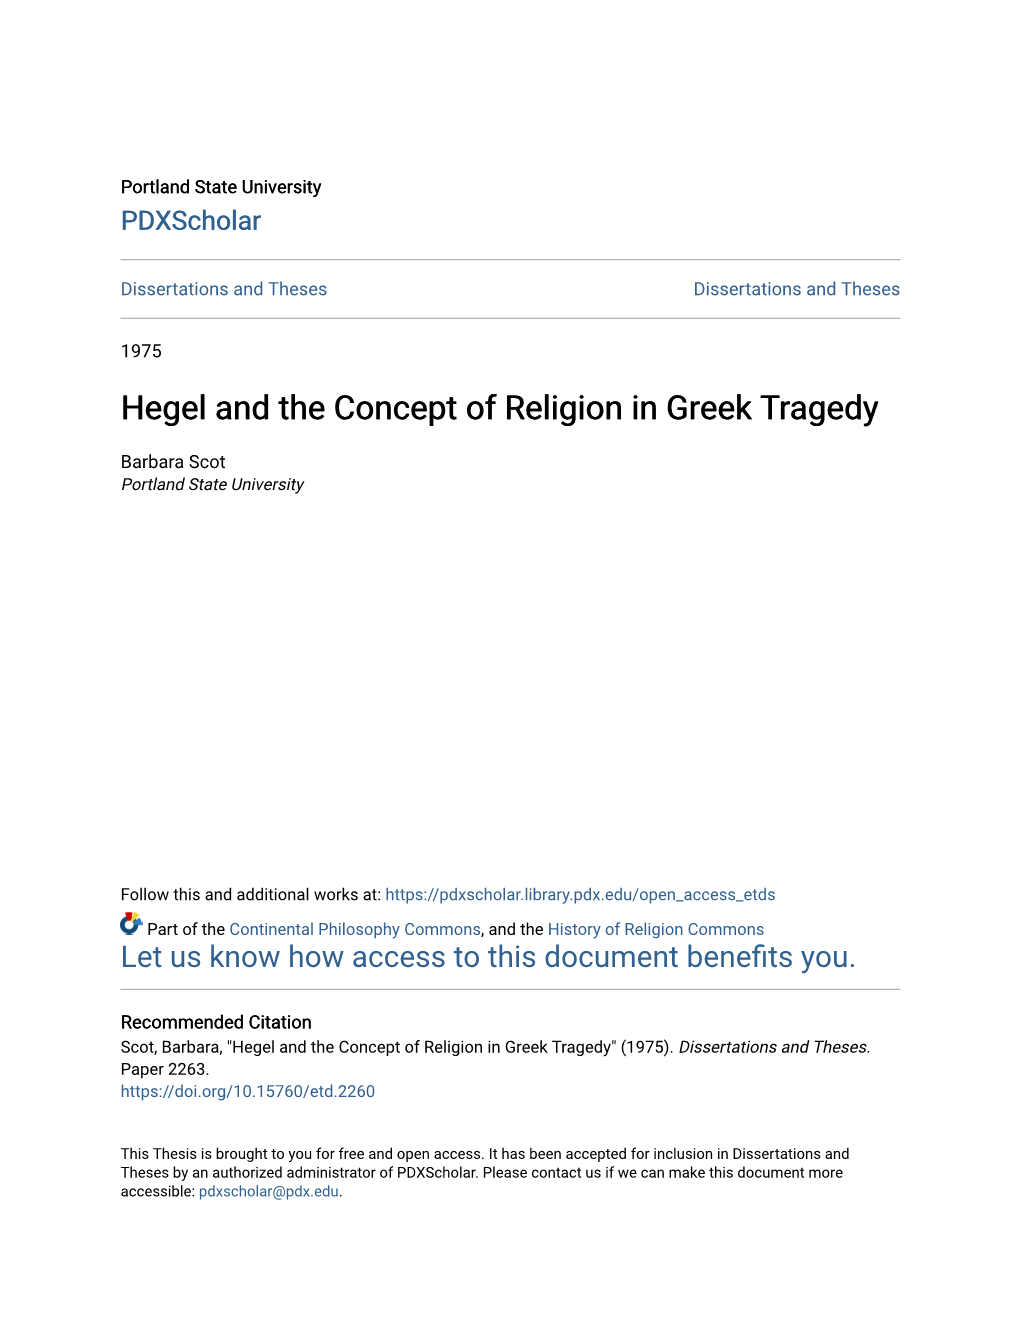 Hegel and the Concept of Religion in Greek Tragedy